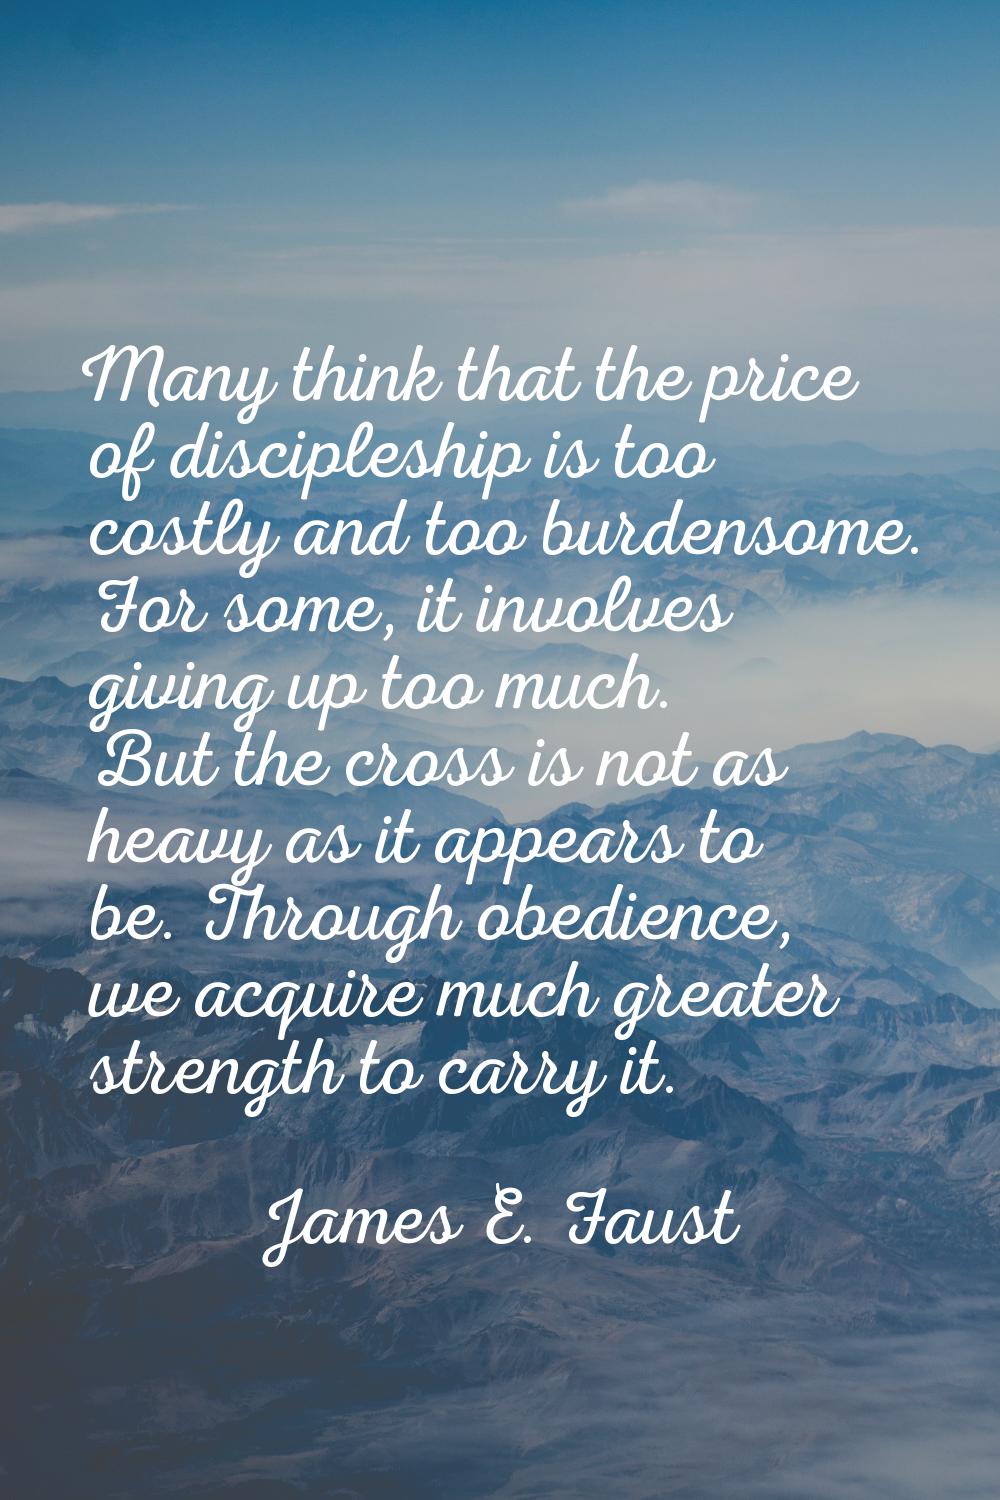 Many think that the price of discipleship is too costly and too burdensome. For some, it involves g